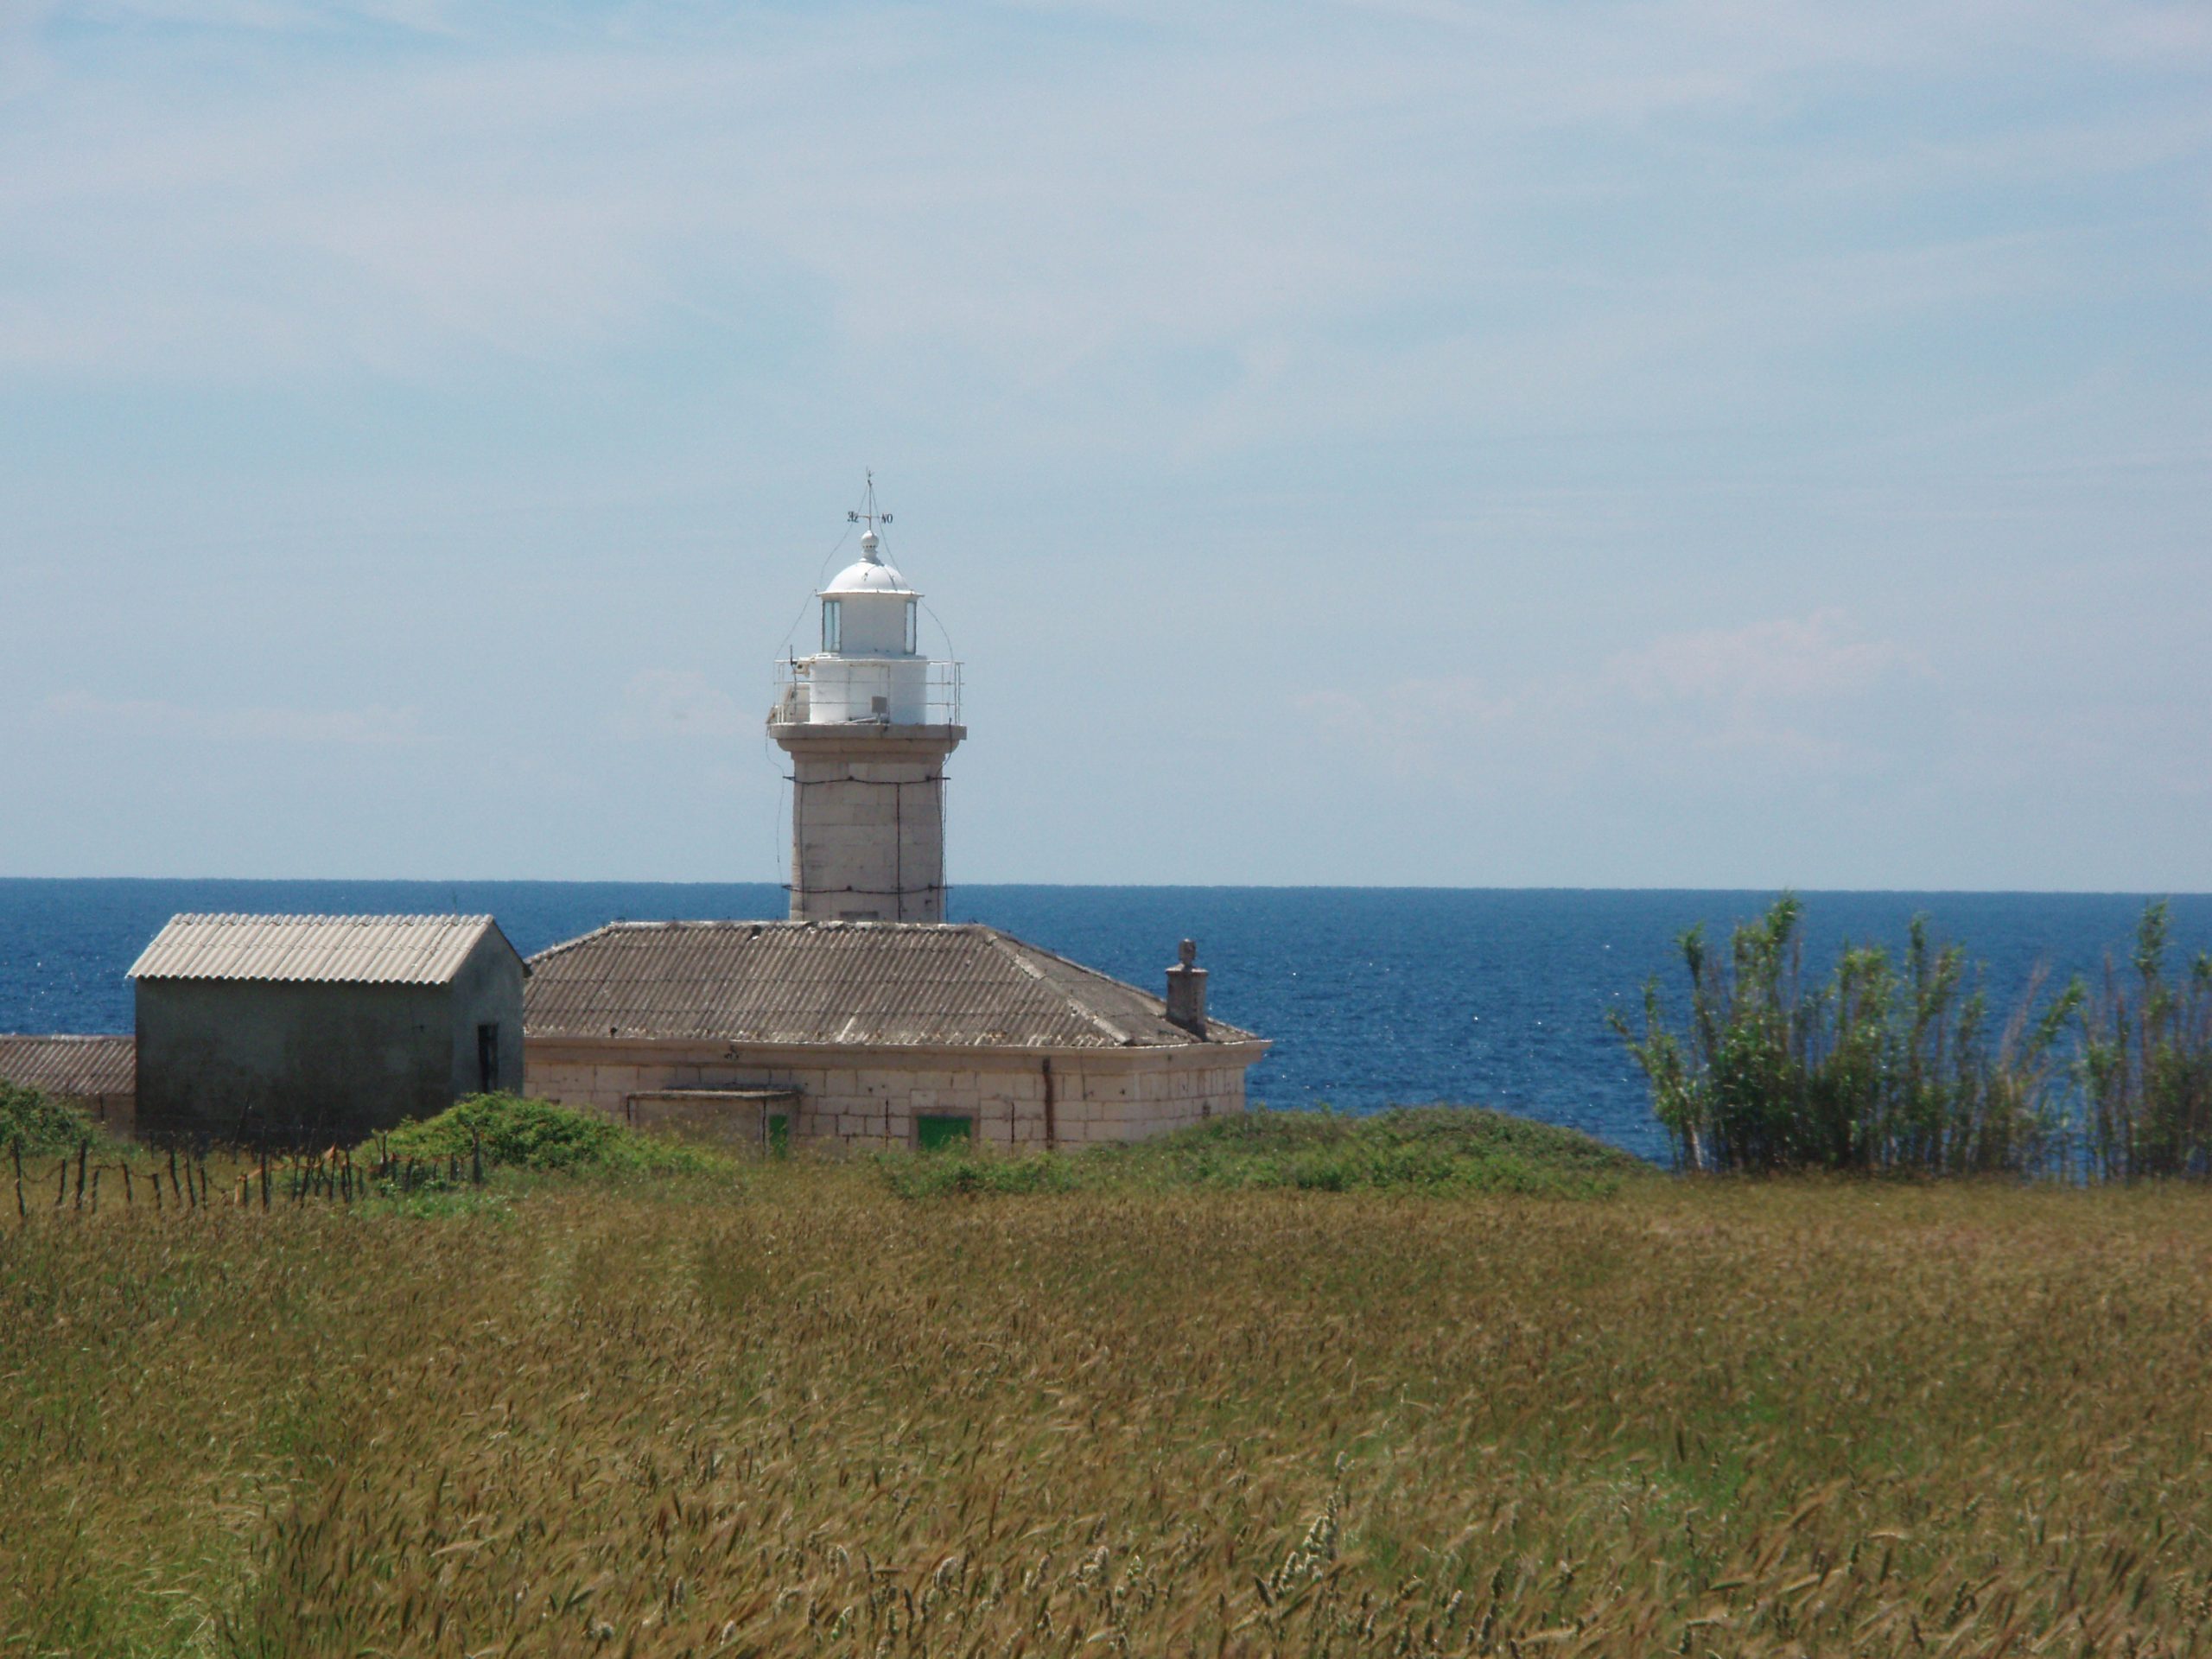 Vnetak Lighthouse on the southwestern part of Unije, automated and home to a flock of sheep. The poignant smell of sheep dung washes over you as you come near.